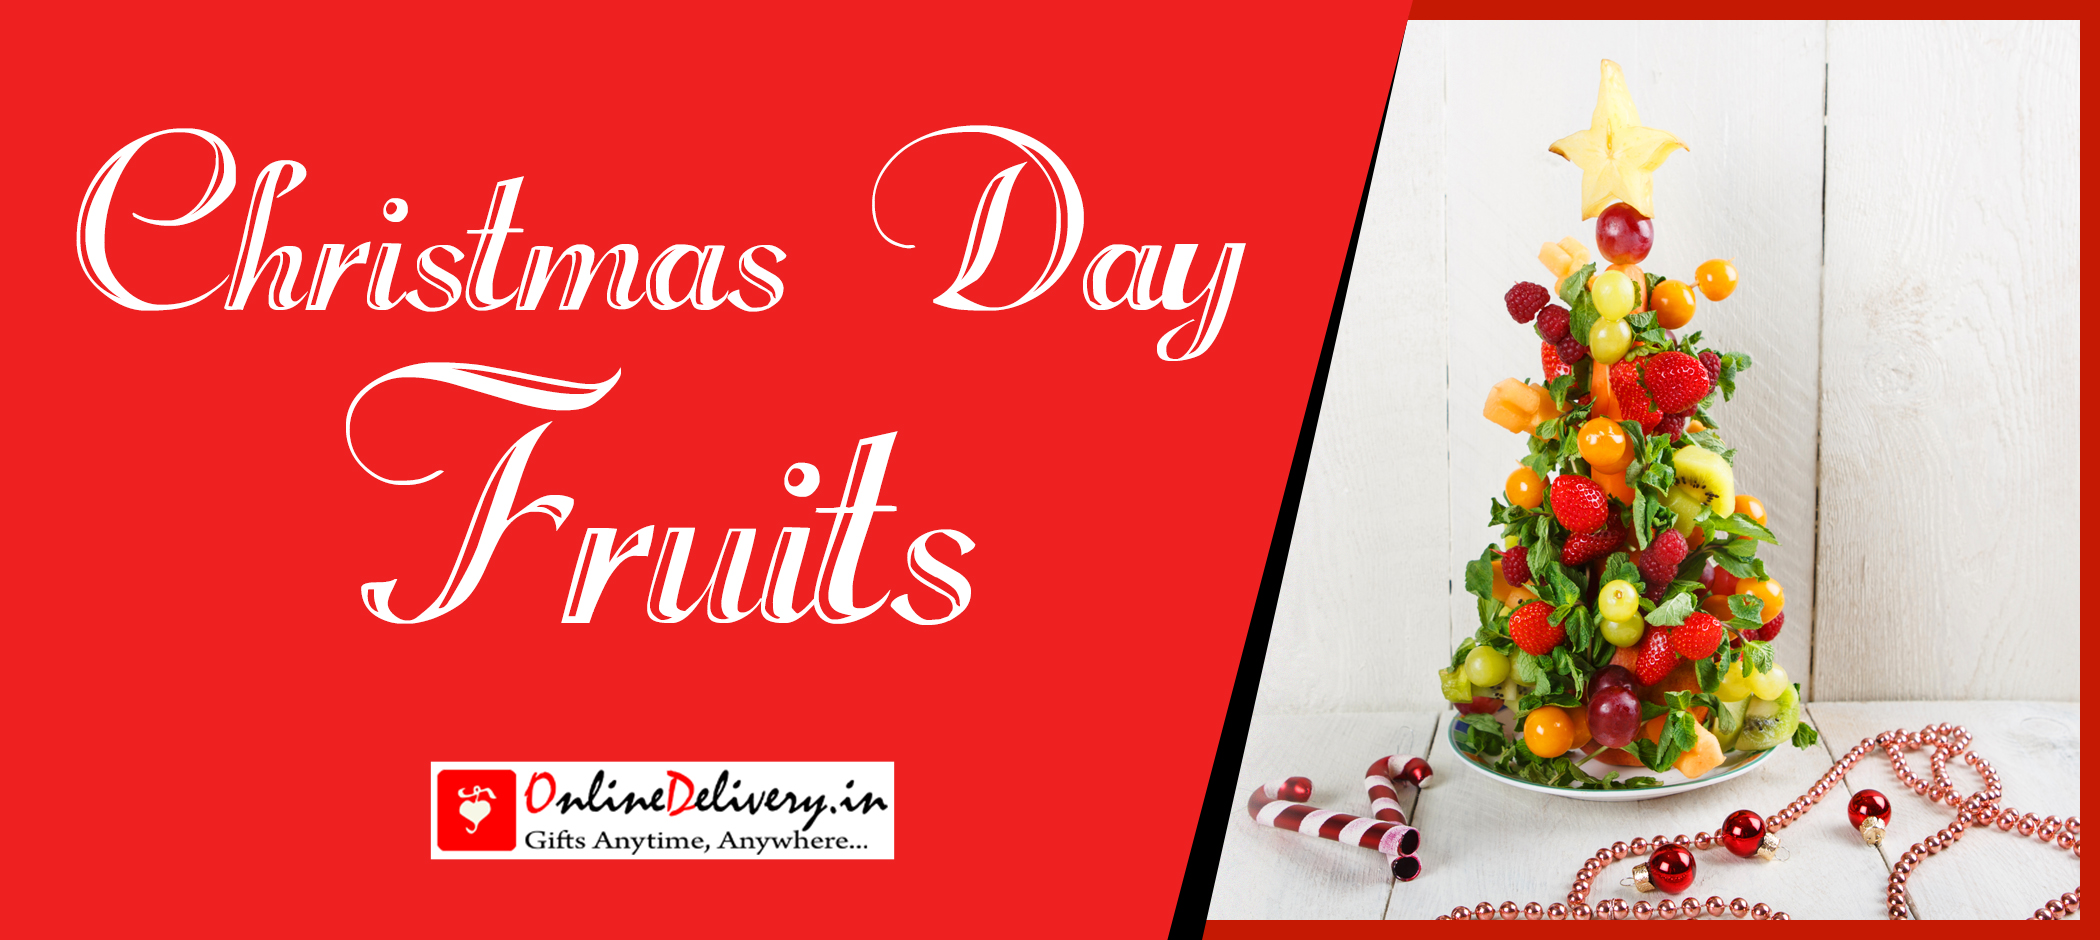 How Christmas Day Fruits Are A Perfect Gift Idea To Surprise Your Dear Ones